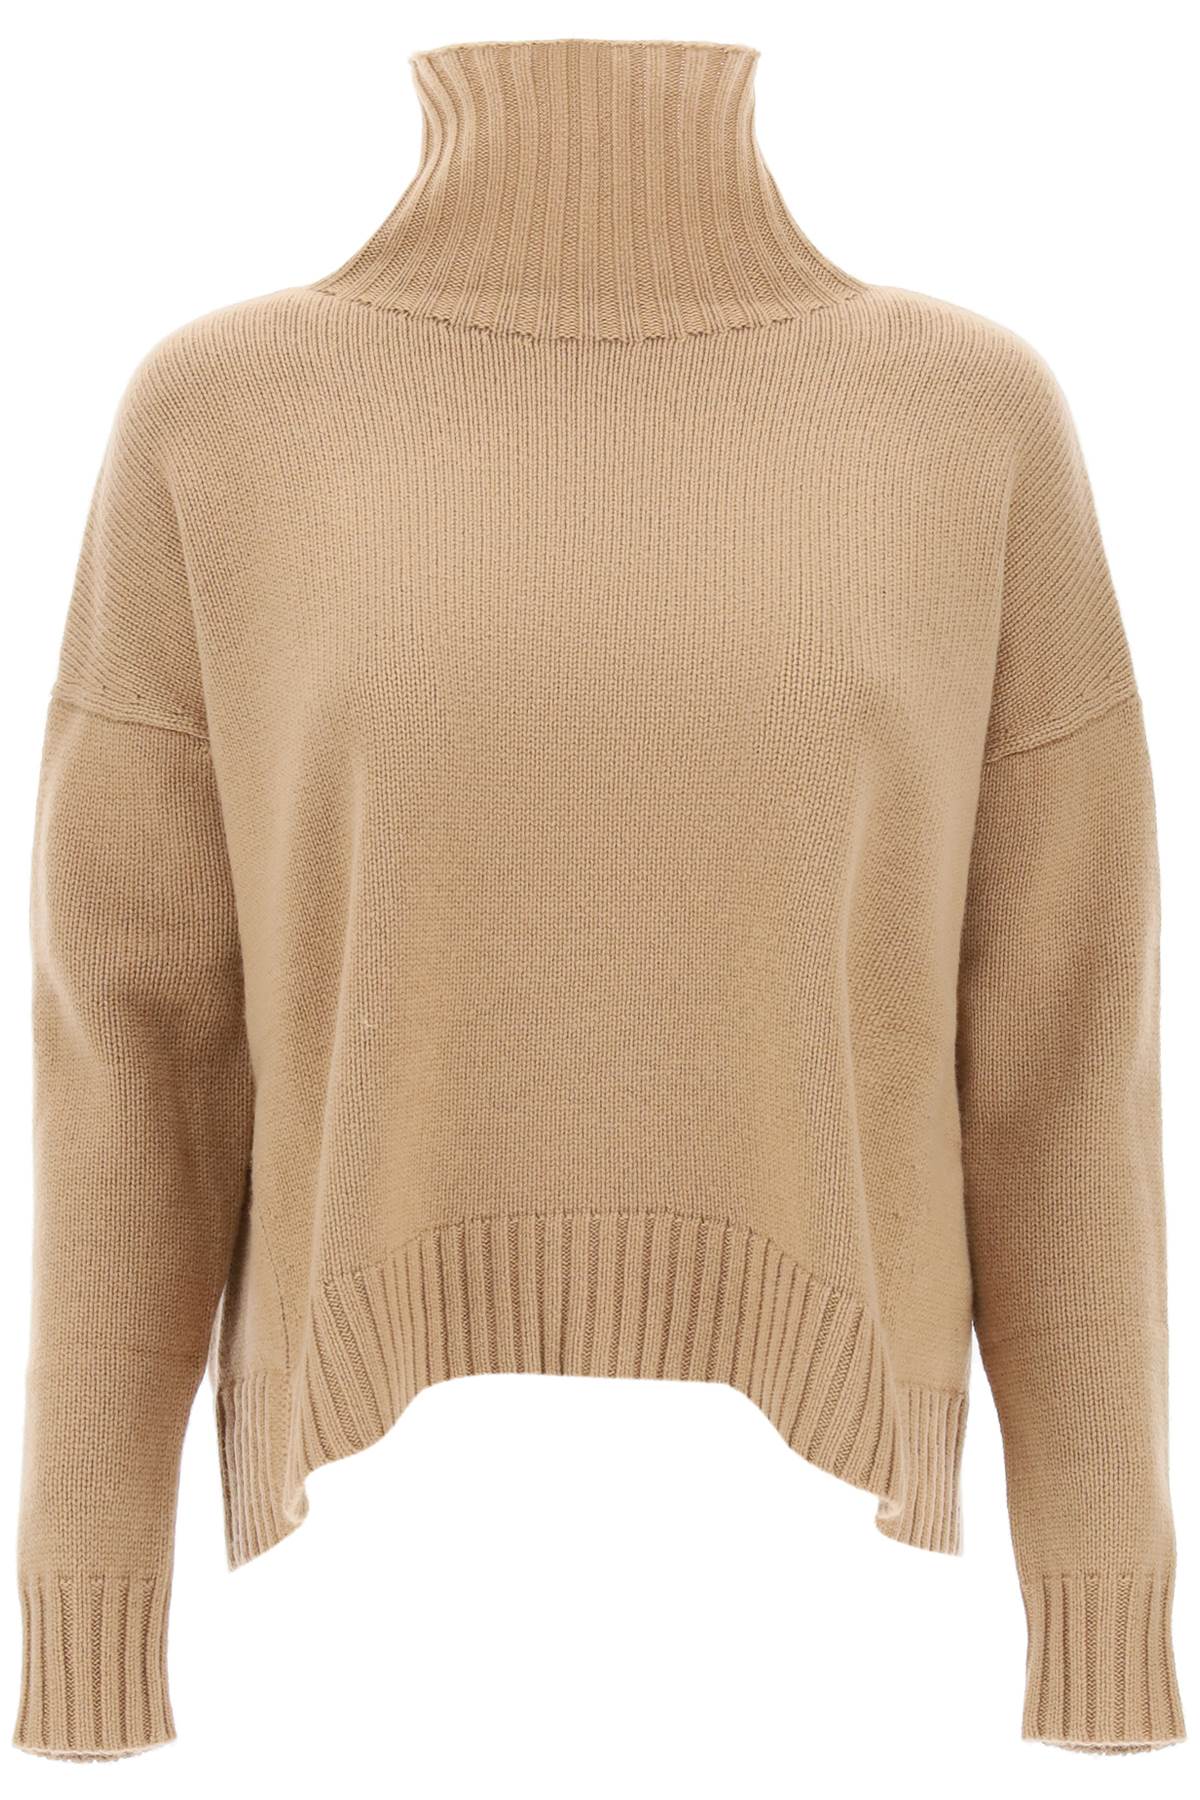 Max Mara 'gianna' Wool And Cashmere Funnel-neck Sweater In Camel